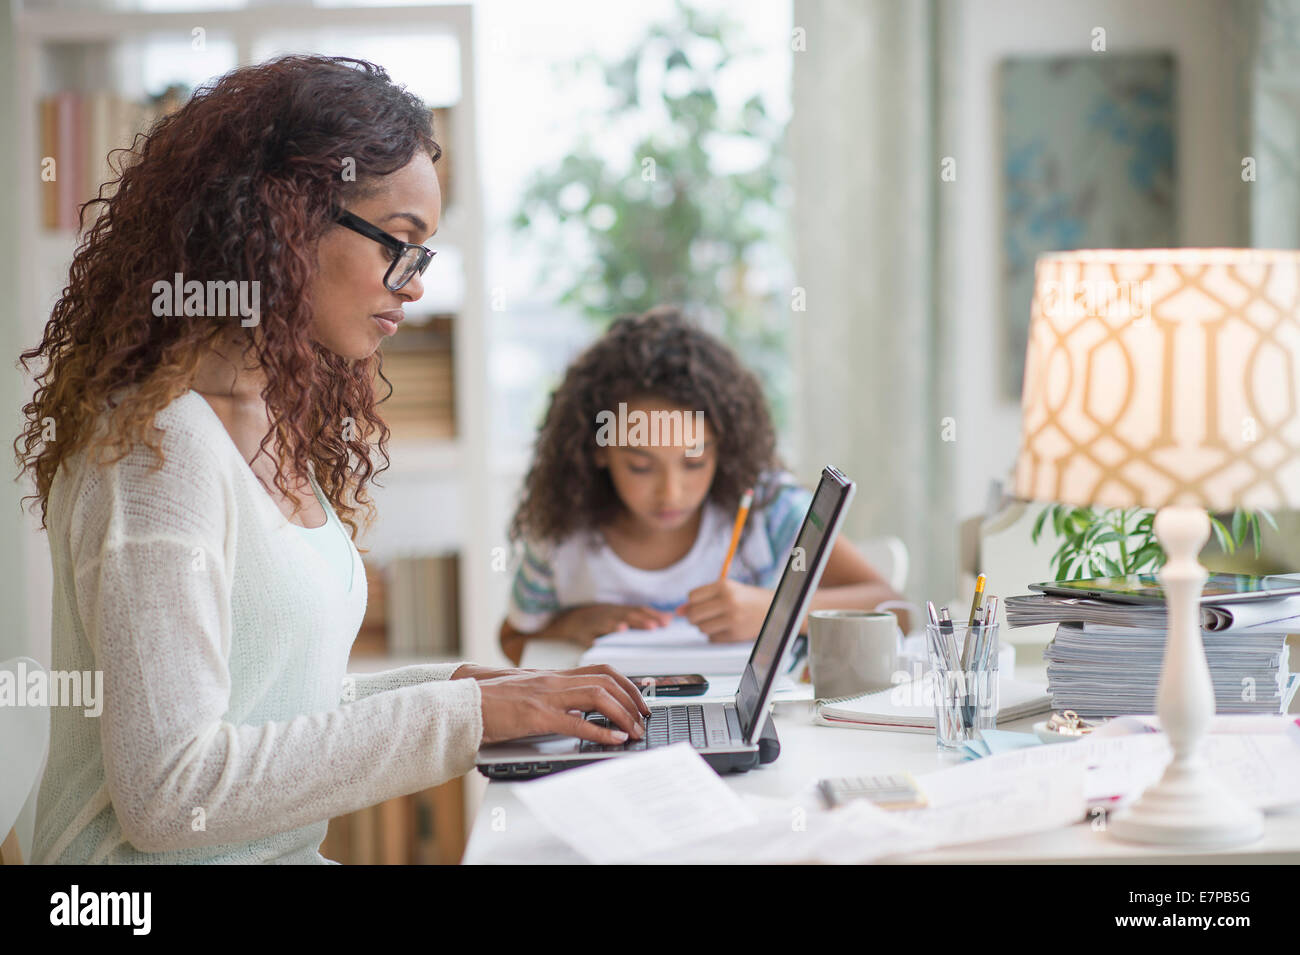 Woman using laptop at home, girl (8-9) doing homework in background Stock Photo